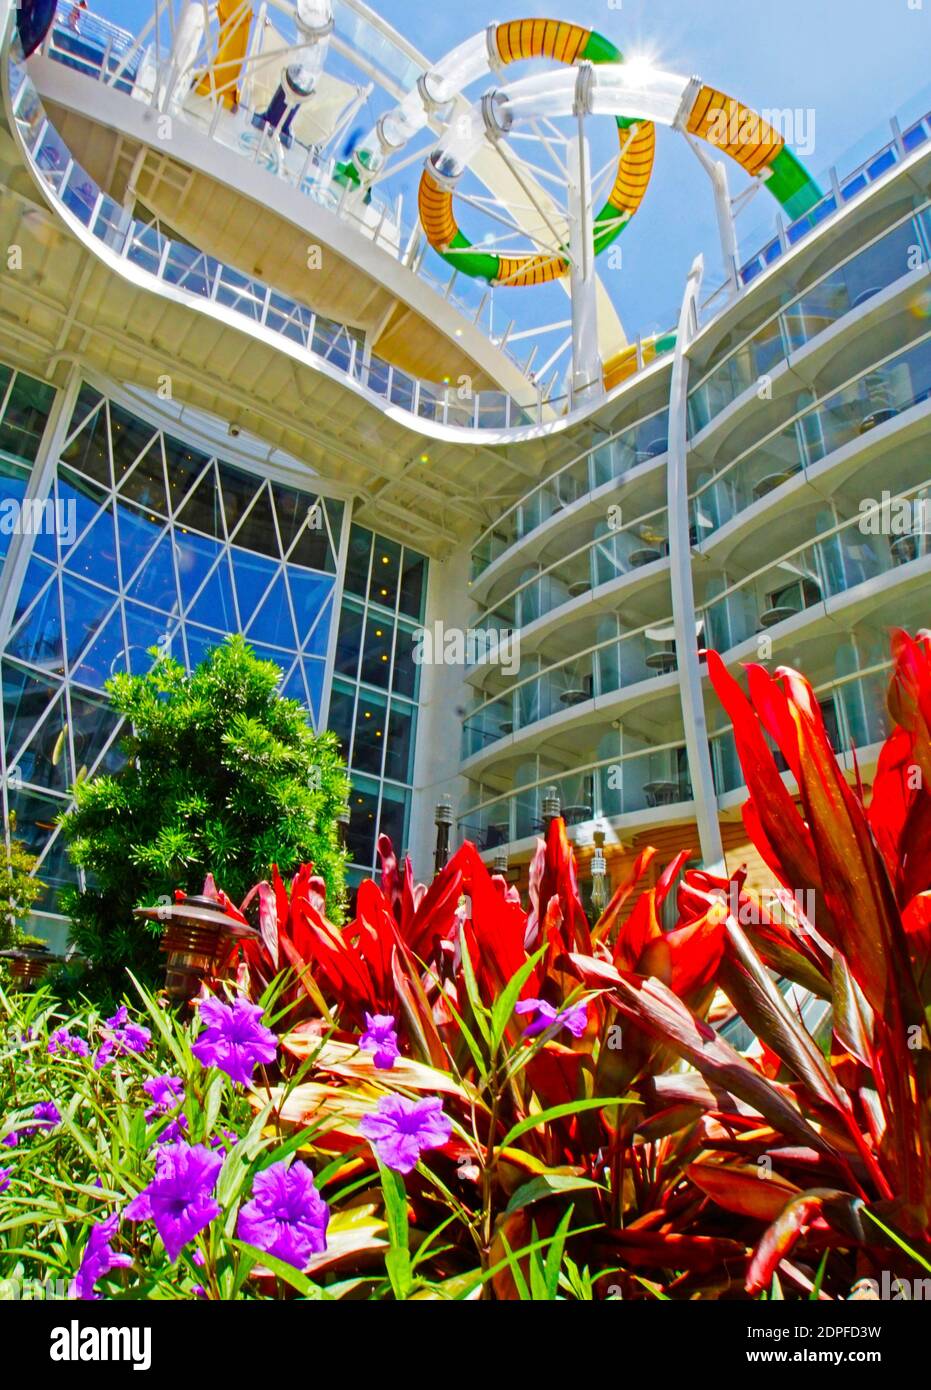 Water slides on top of Symphony of the Seas cruise ship viewed from flowers growing garden in Central Park. Stock Photo